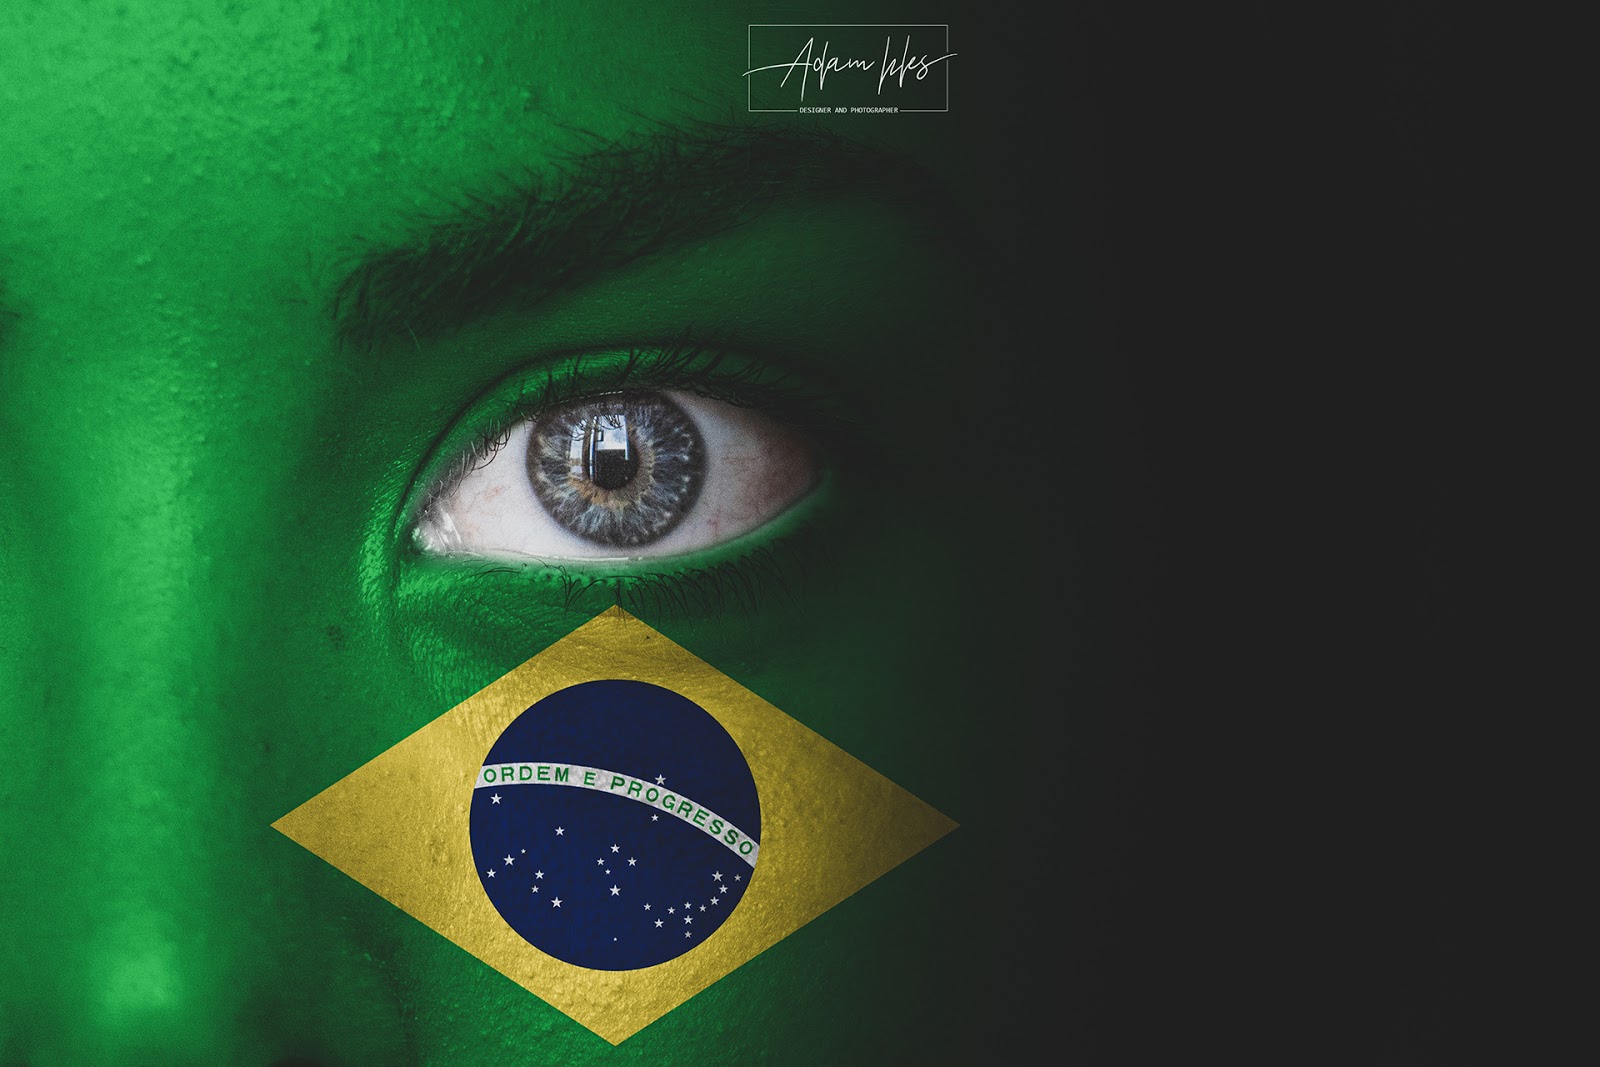 Photo of the flag of Brazil